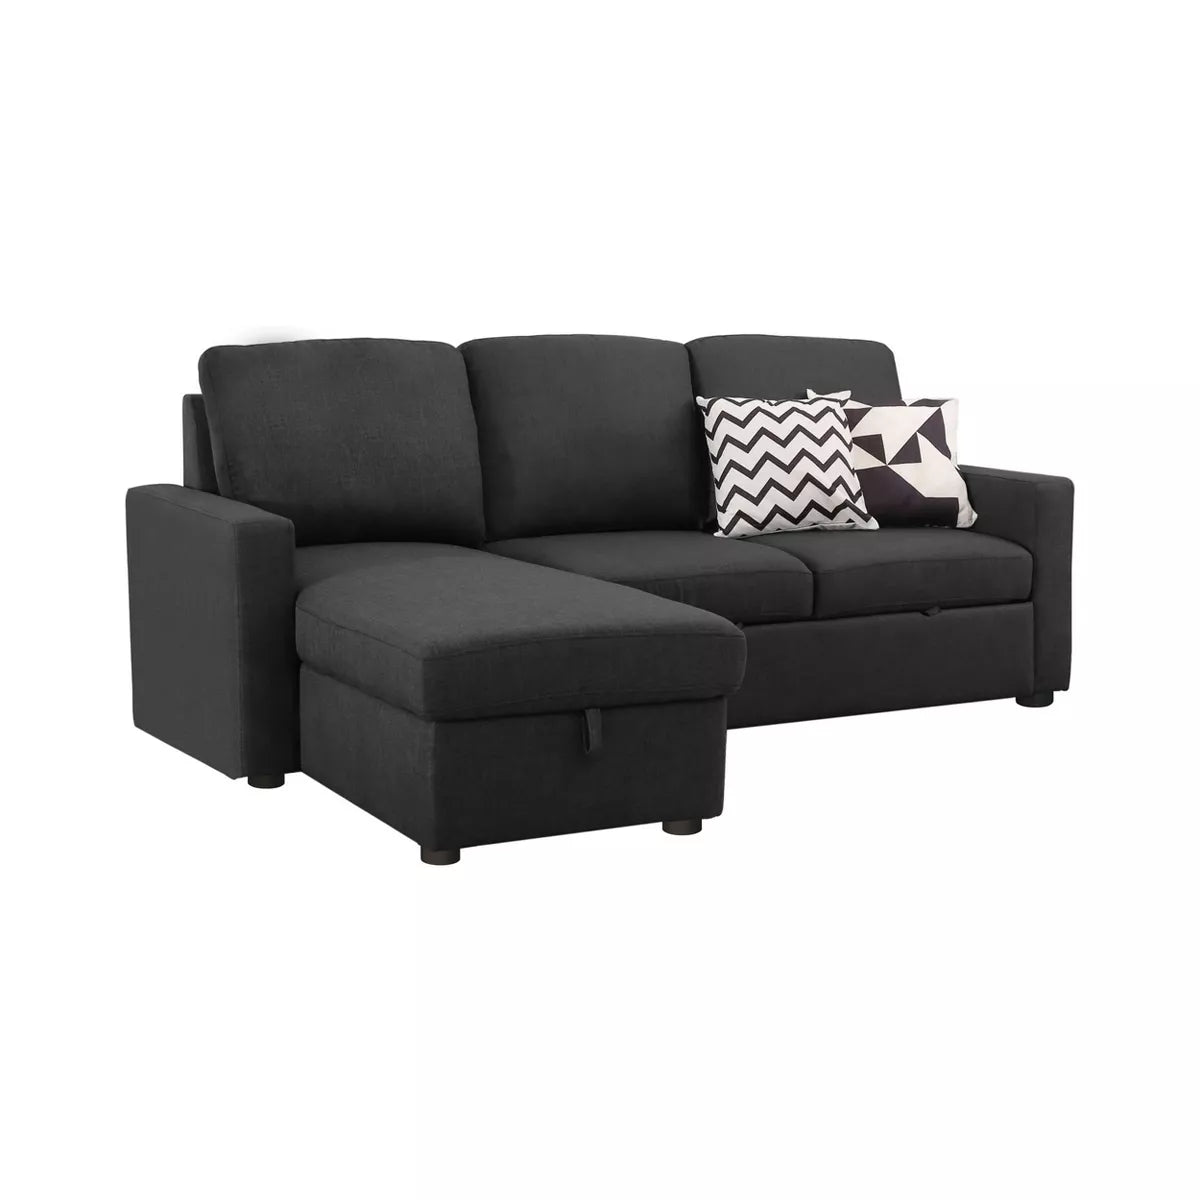 William Storage Sofa Bed Sectional - Abbyson Living Sofa